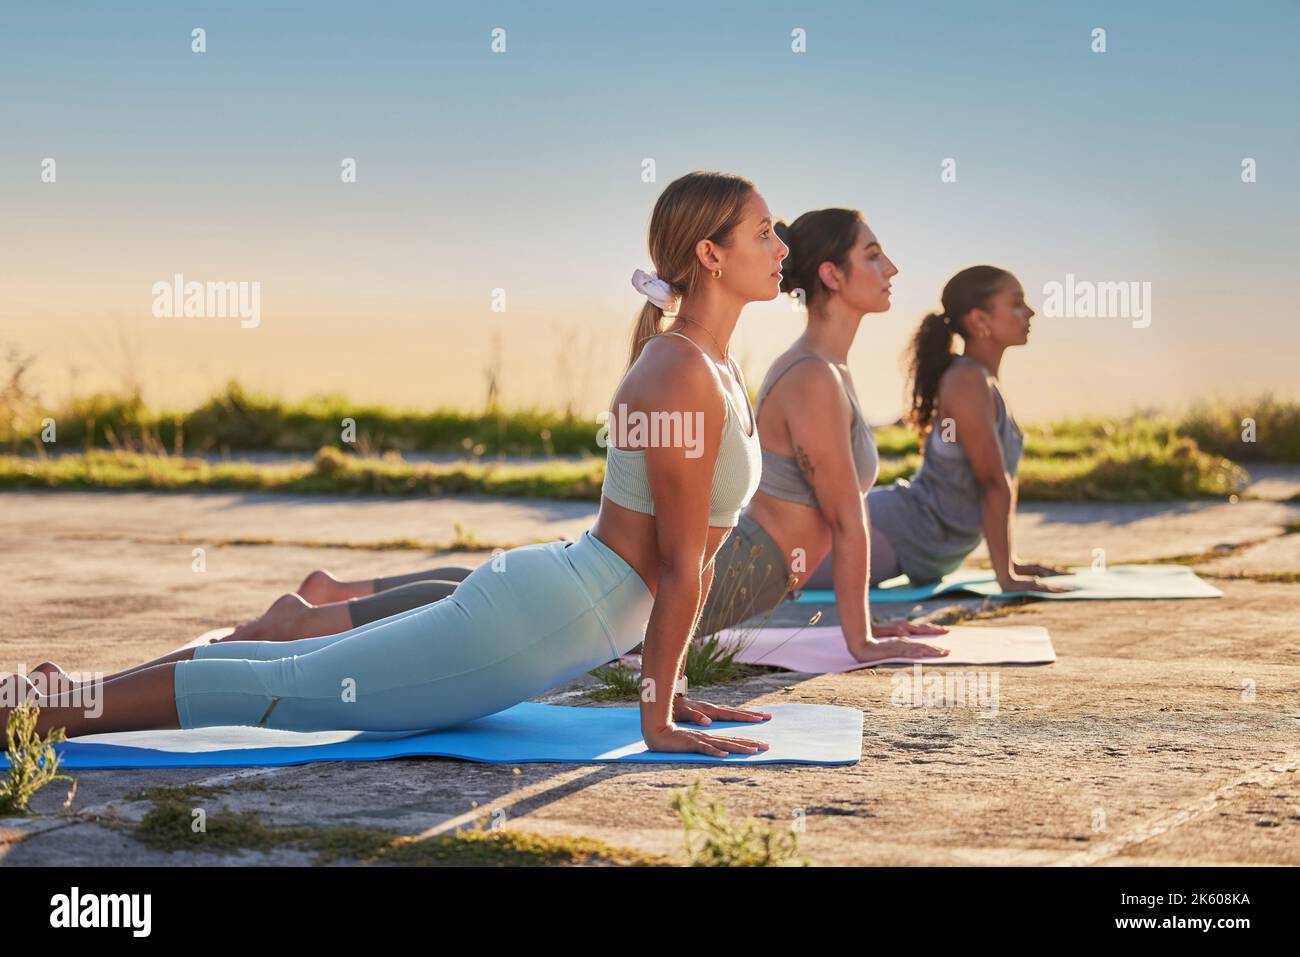 Full length yoga women in upwards facing dog pose for outdoor practice in remote nature. Diverse group of serious active friends using mat, balancing Stock Photo